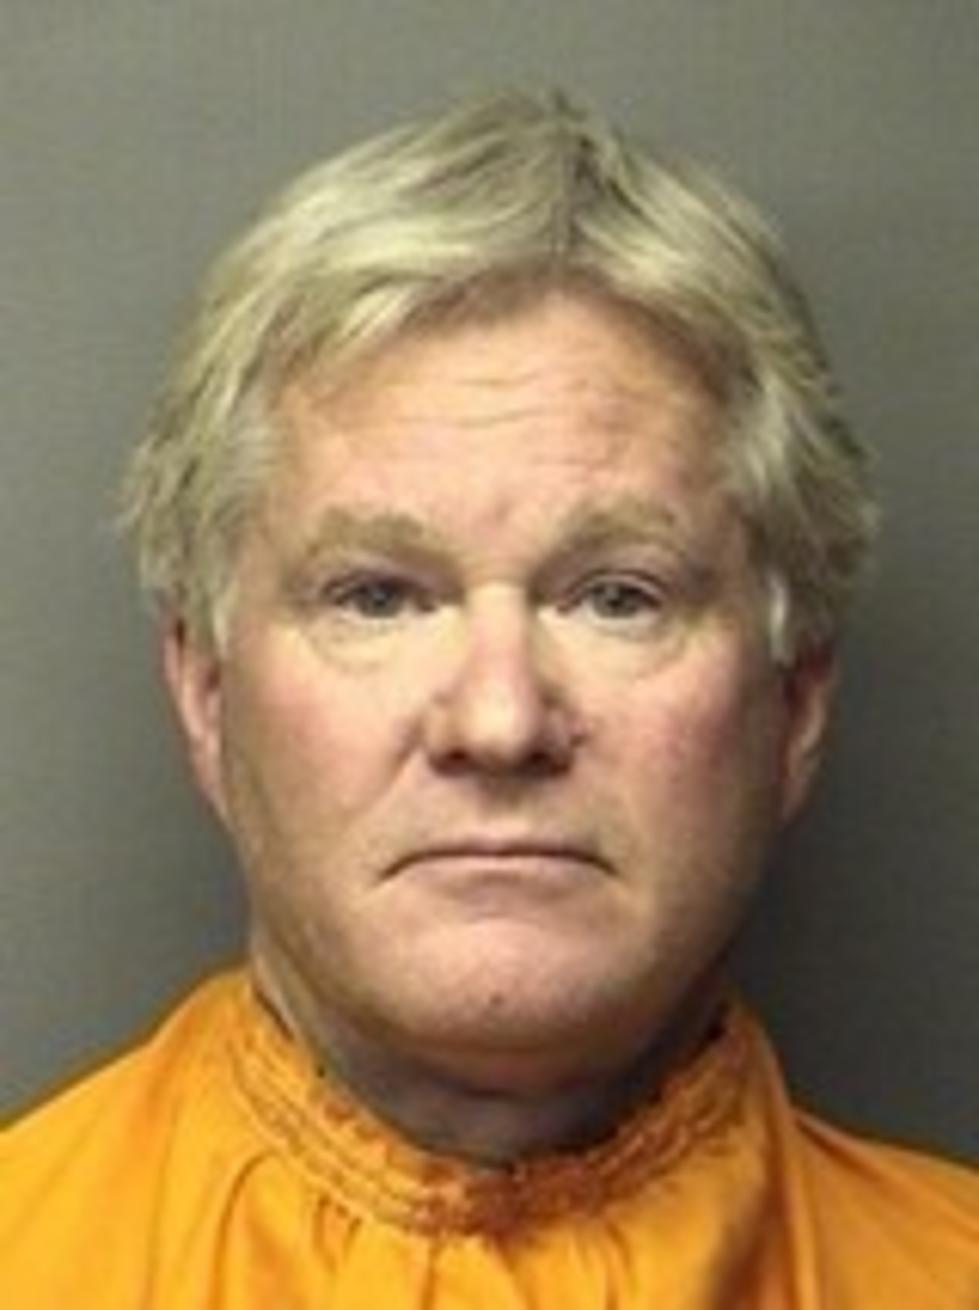 Clay County Resident Arrested for Aggravated Sexual Assault of a Child